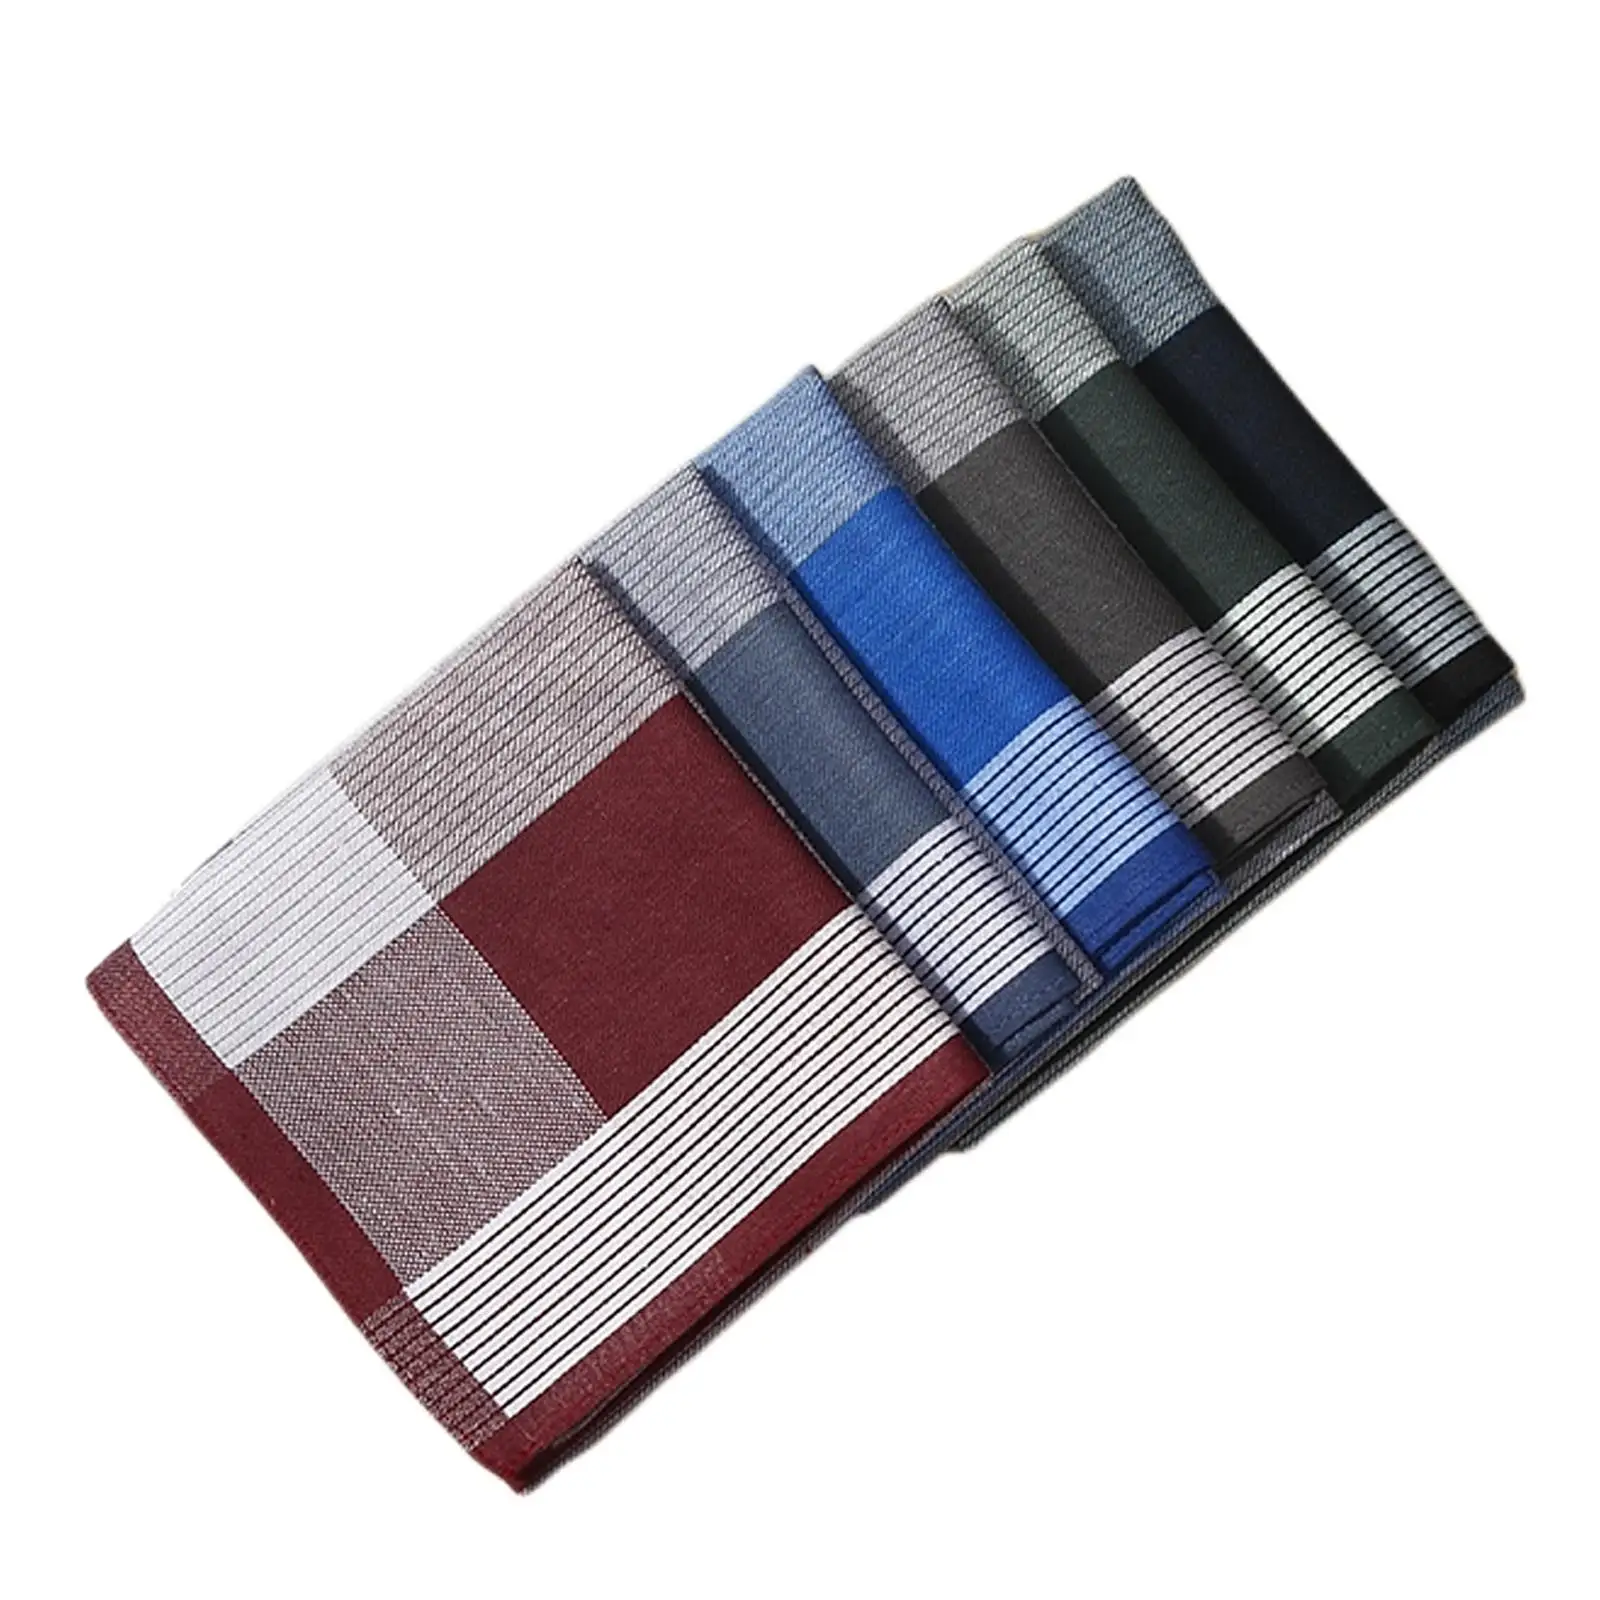 6x Classic Pocket Square Hankies Gift 43cm Assorted Color Cotton Men`s Handkerchiefs for Birthday Celebration Prom Formal Casual